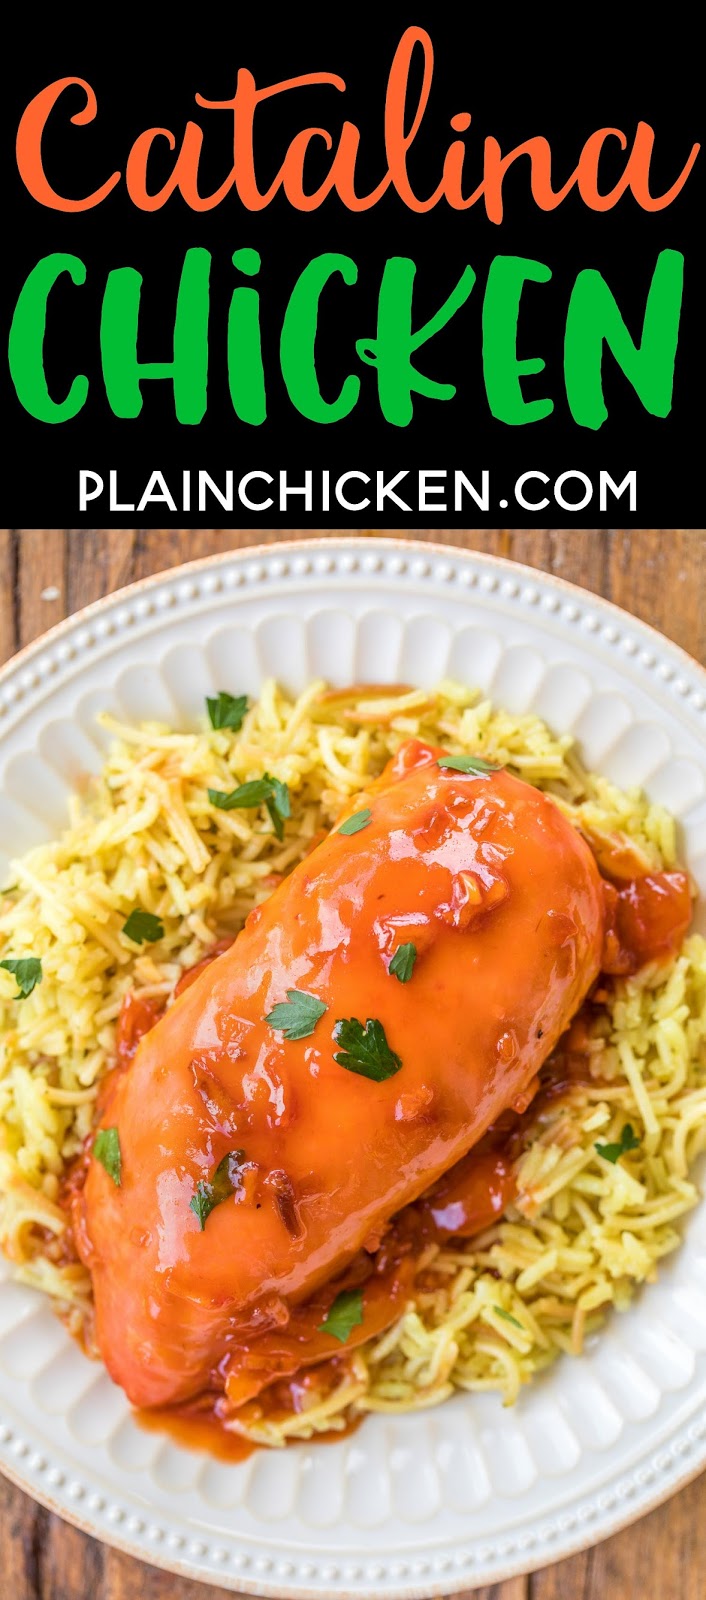 CHICKEN RECIPE WITH FRENCH DRESSING AND ONION SOUP MIX